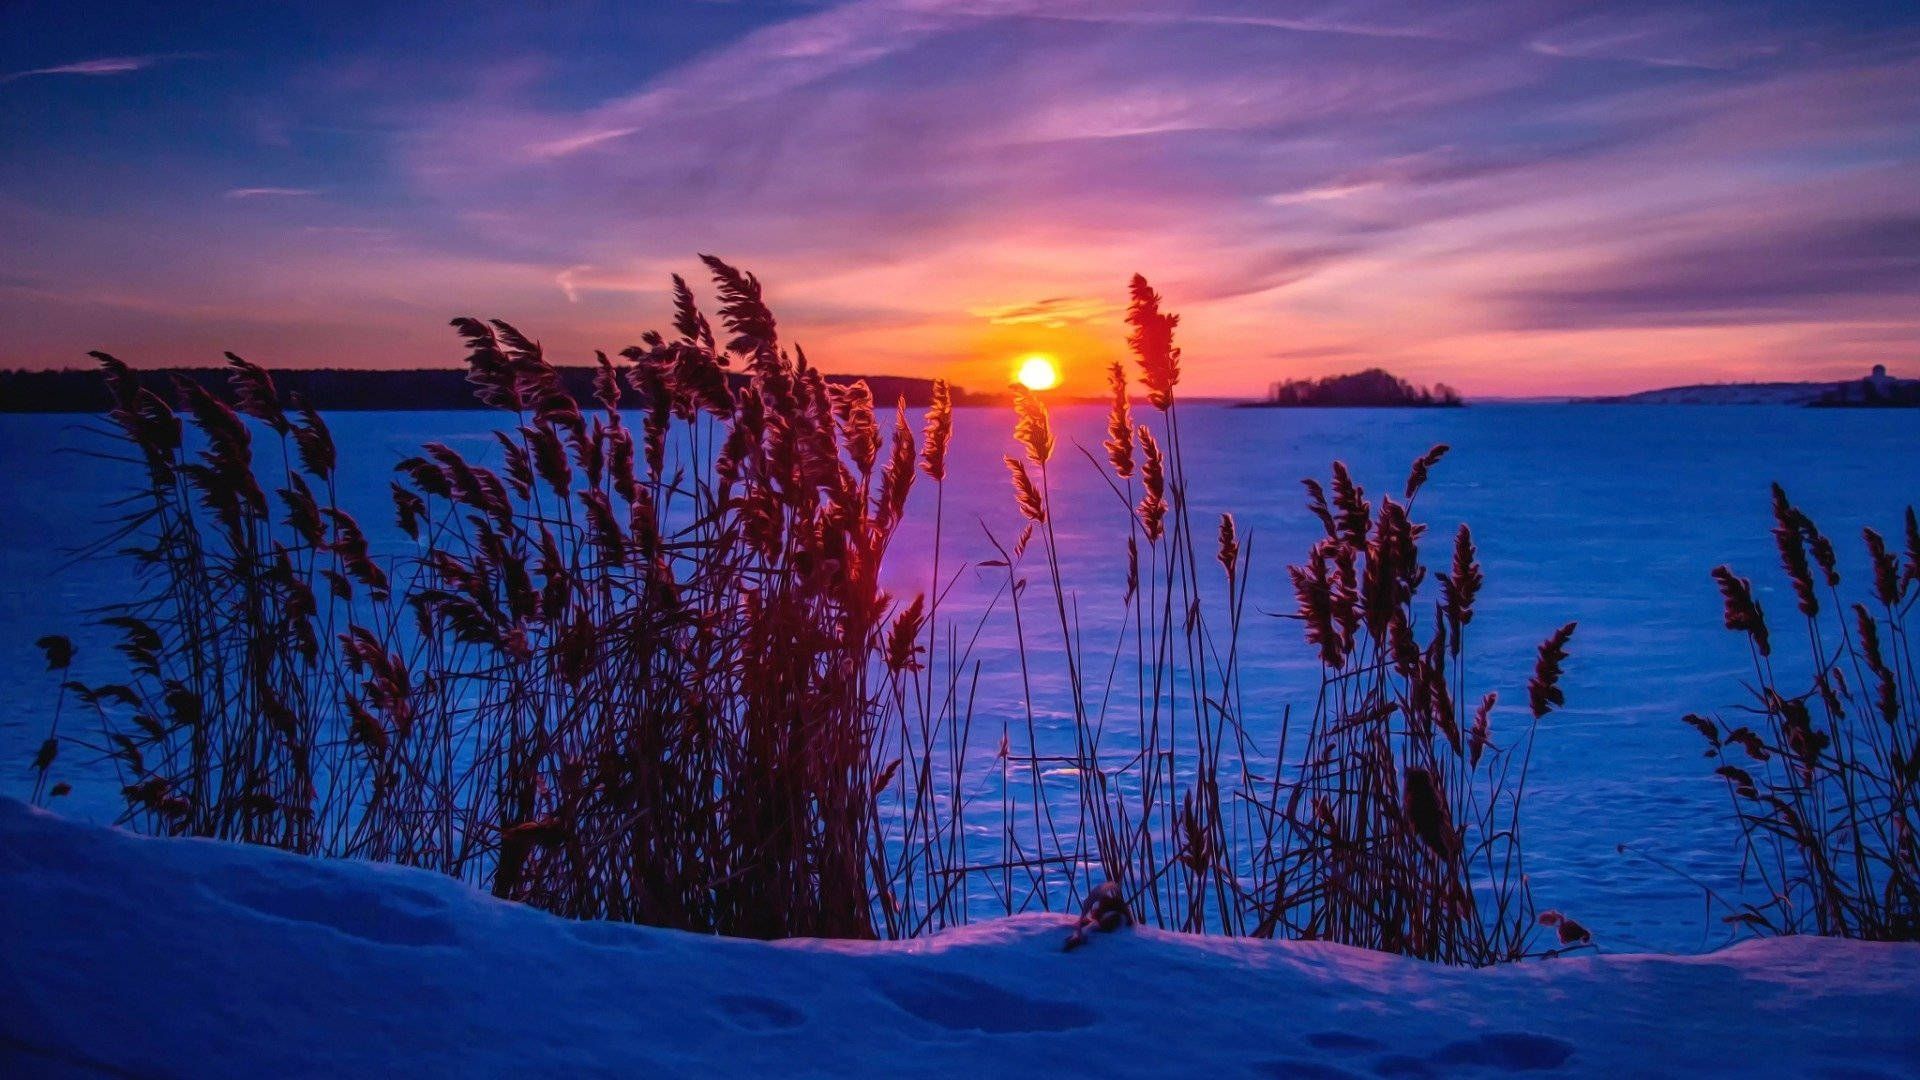 A beautiful sunset over a frozen lake with tall grass in the foreground. - Sunrise, landscape